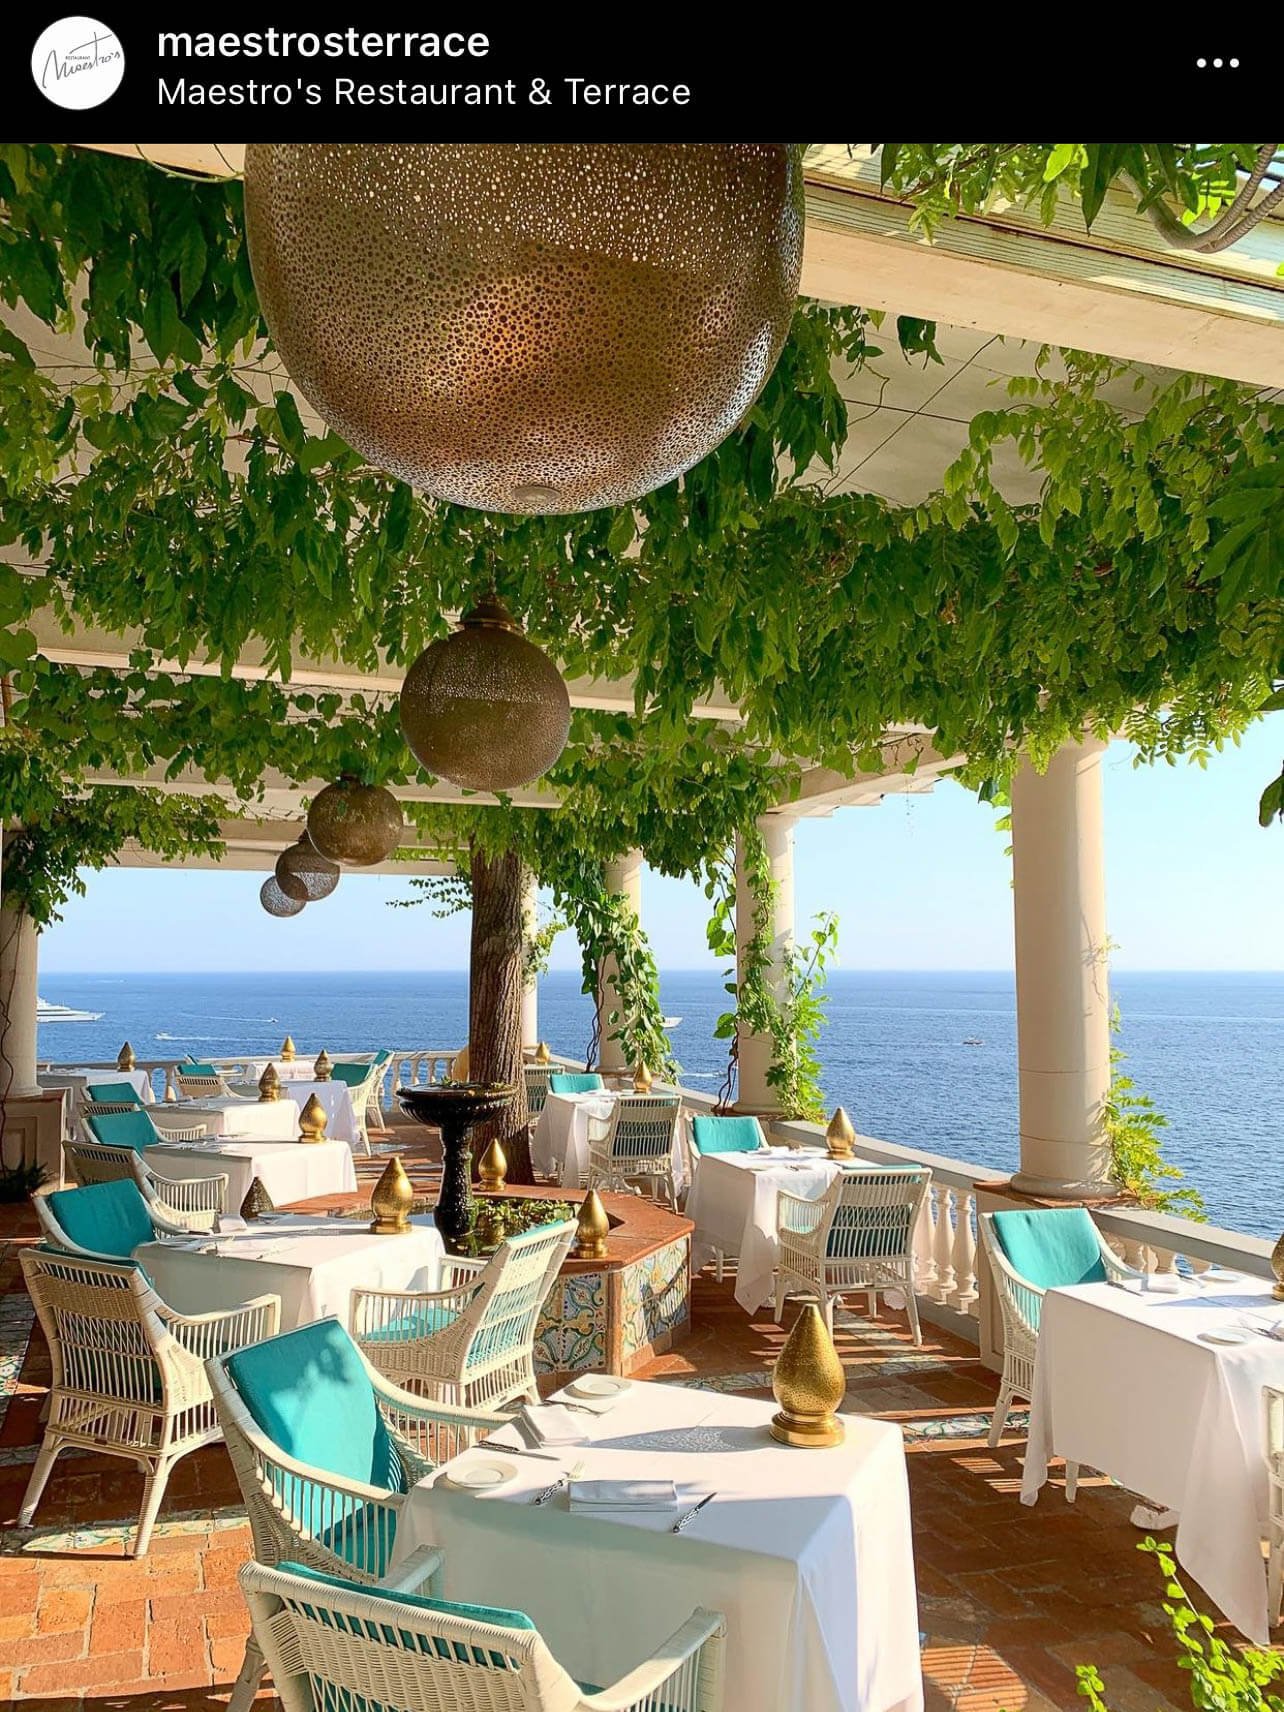 If you’re hunting for great Positano restaurants with a view, look no further than Maestro.